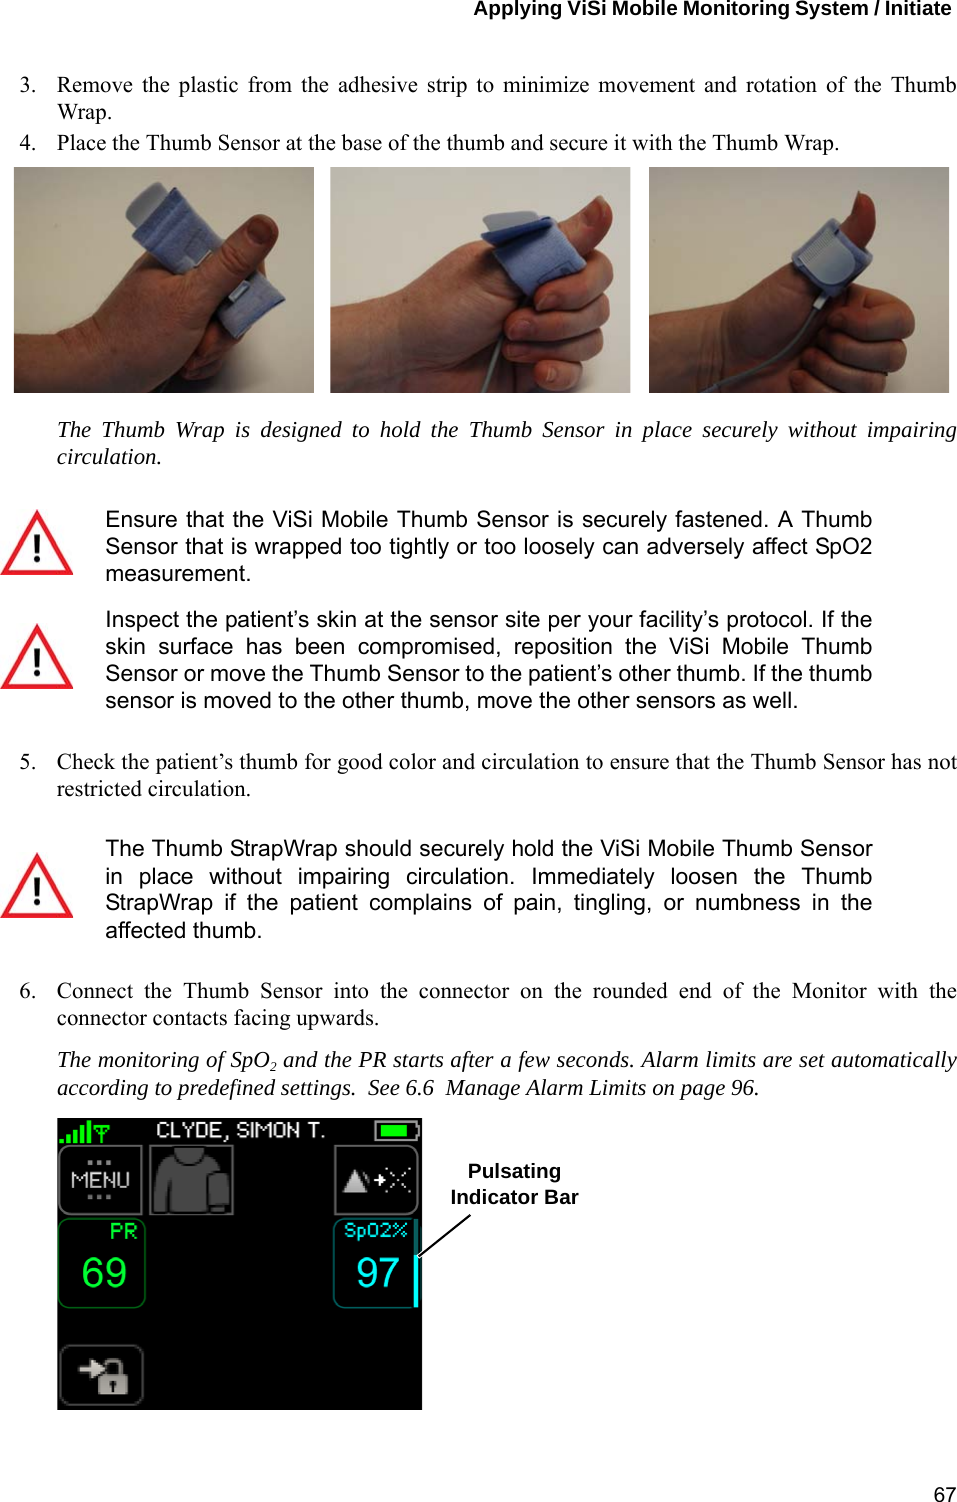 Applying ViSi Mobile Monitoring System / Initiate 673. Remove the plastic from the adhesive strip to minimize movement and rotation of the ThumbWrap.4. Place the Thumb Sensor at the base of the thumb and secure it with the Thumb Wrap. The Thumb Wrap is designed to hold the Thumb Sensor in place securely without impairingcirculation.5. Check the patient’s thumb for good color and circulation to ensure that the Thumb Sensor has notrestricted circulation. 6. Connect the Thumb Sensor into the connector on the rounded end of the Monitor with theconnector contacts facing upwards.The monitoring of SpO2 and the PR starts after a few seconds. Alarm limits are set automaticallyaccording to predefined settings.  See 6.6  Manage Alarm Limits on page 96. Ensure that the ViSi Mobile Thumb Sensor is securely fastened. A ThumbSensor that is wrapped too tightly or too loosely can adversely affect SpO2measurement.Inspect the patient’s skin at the sensor site per your facility’s protocol. If theskin surface has been compromised, reposition the ViSi Mobile ThumbSensor or move the Thumb Sensor to the patient’s other thumb. If the thumbsensor is moved to the other thumb, move the other sensors as well.The Thumb StrapWrap should securely hold the ViSi Mobile Thumb Sensorin place without impairing circulation. Immediately loosen the ThumbStrapWrap if the patient complains of pain, tingling, or numbness in theaffected thumb.PulsatingIndicator Bar